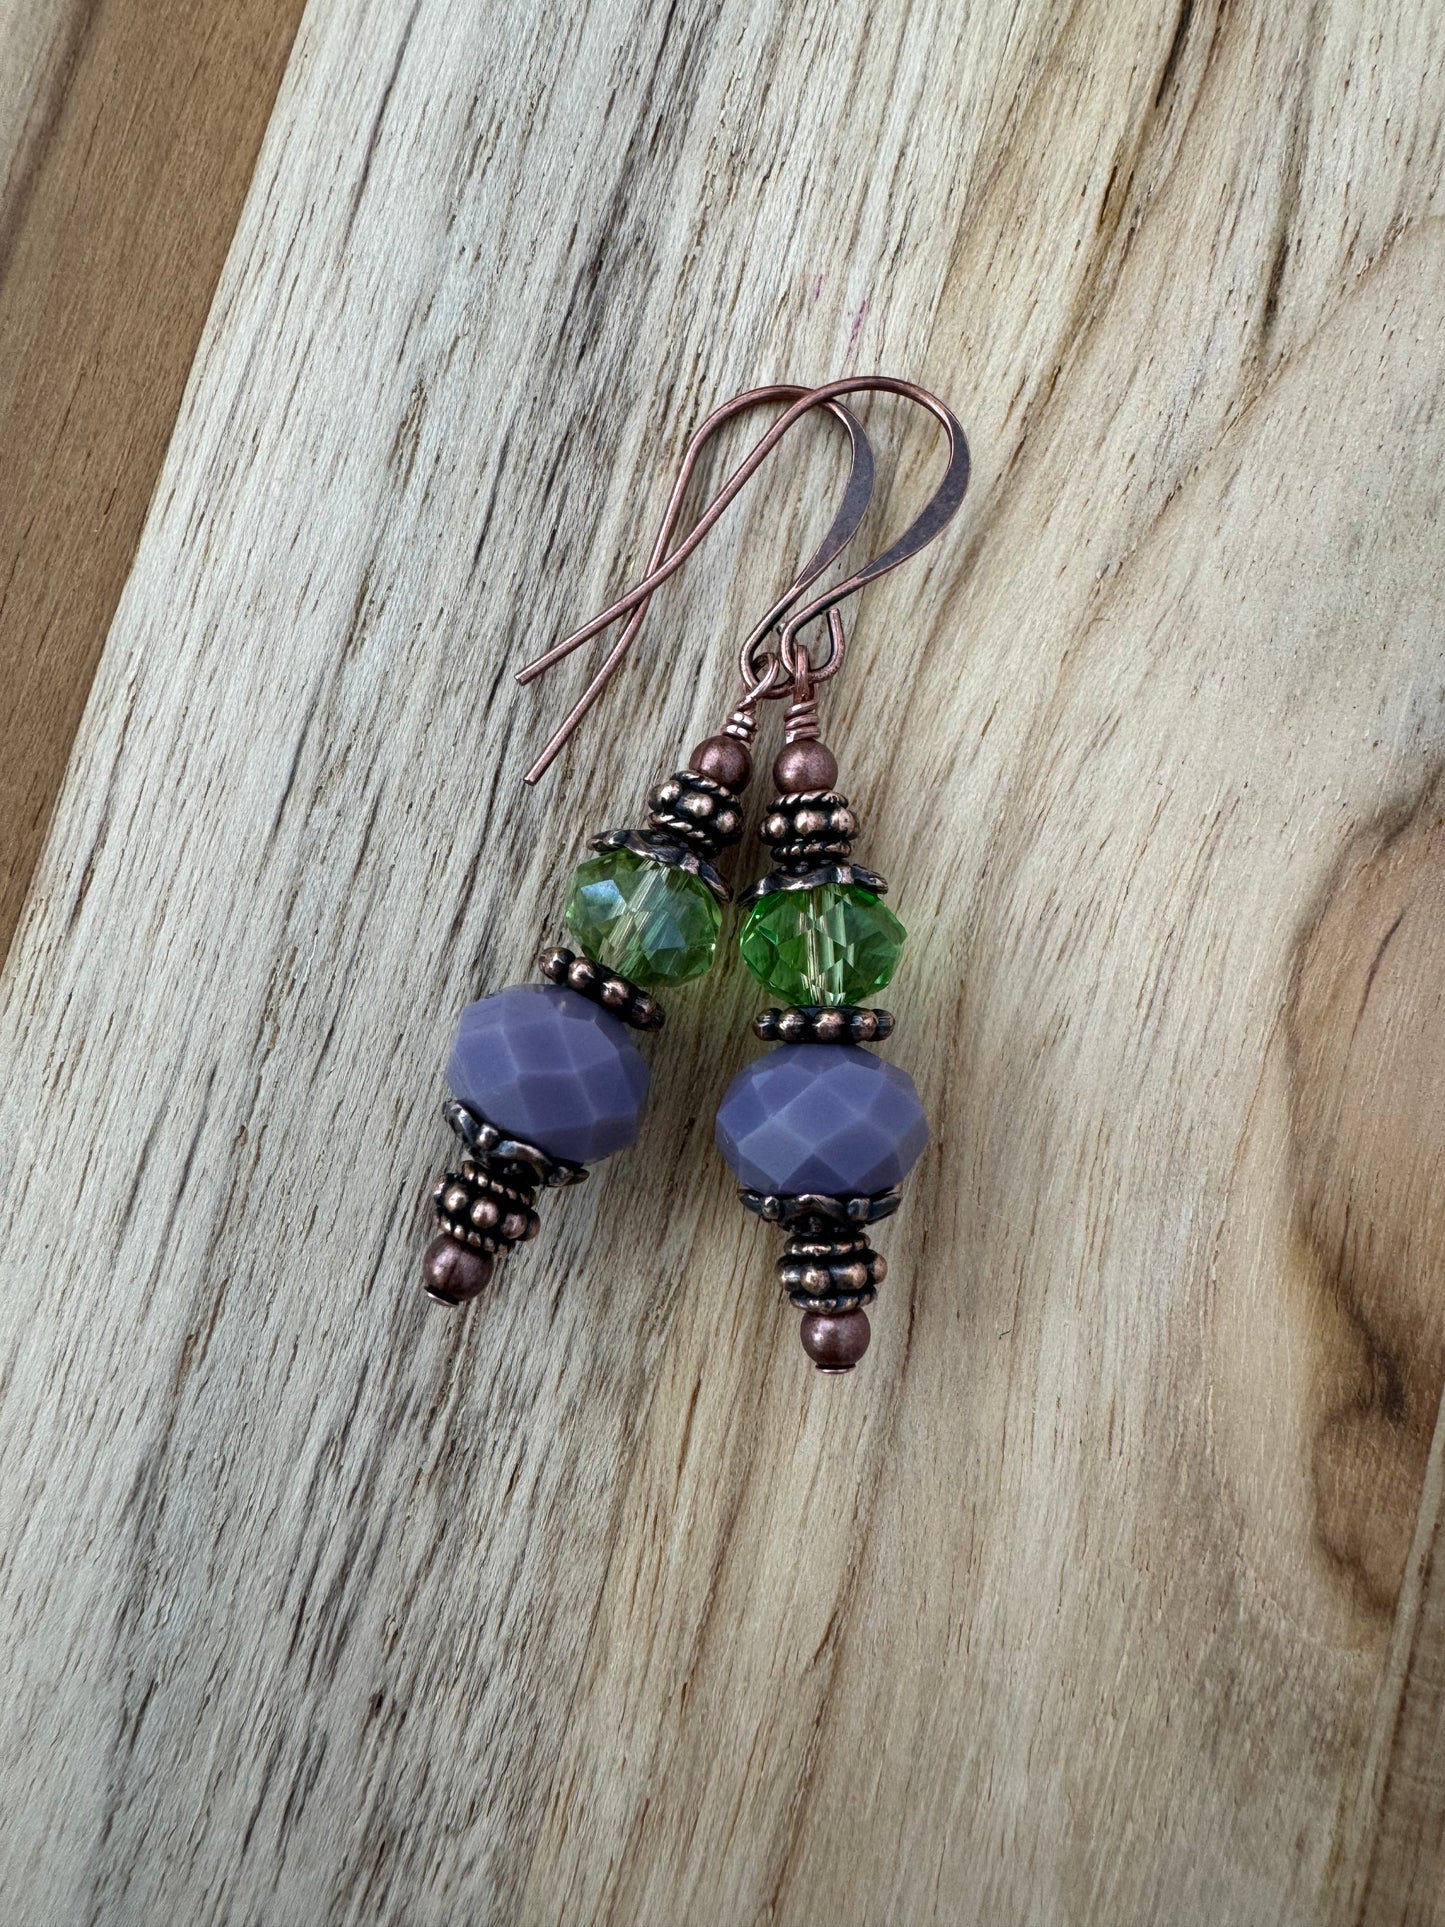 Vintage Vibe Purple and Green Crystal Dangle Earrings with Antique Copper Accent Beads